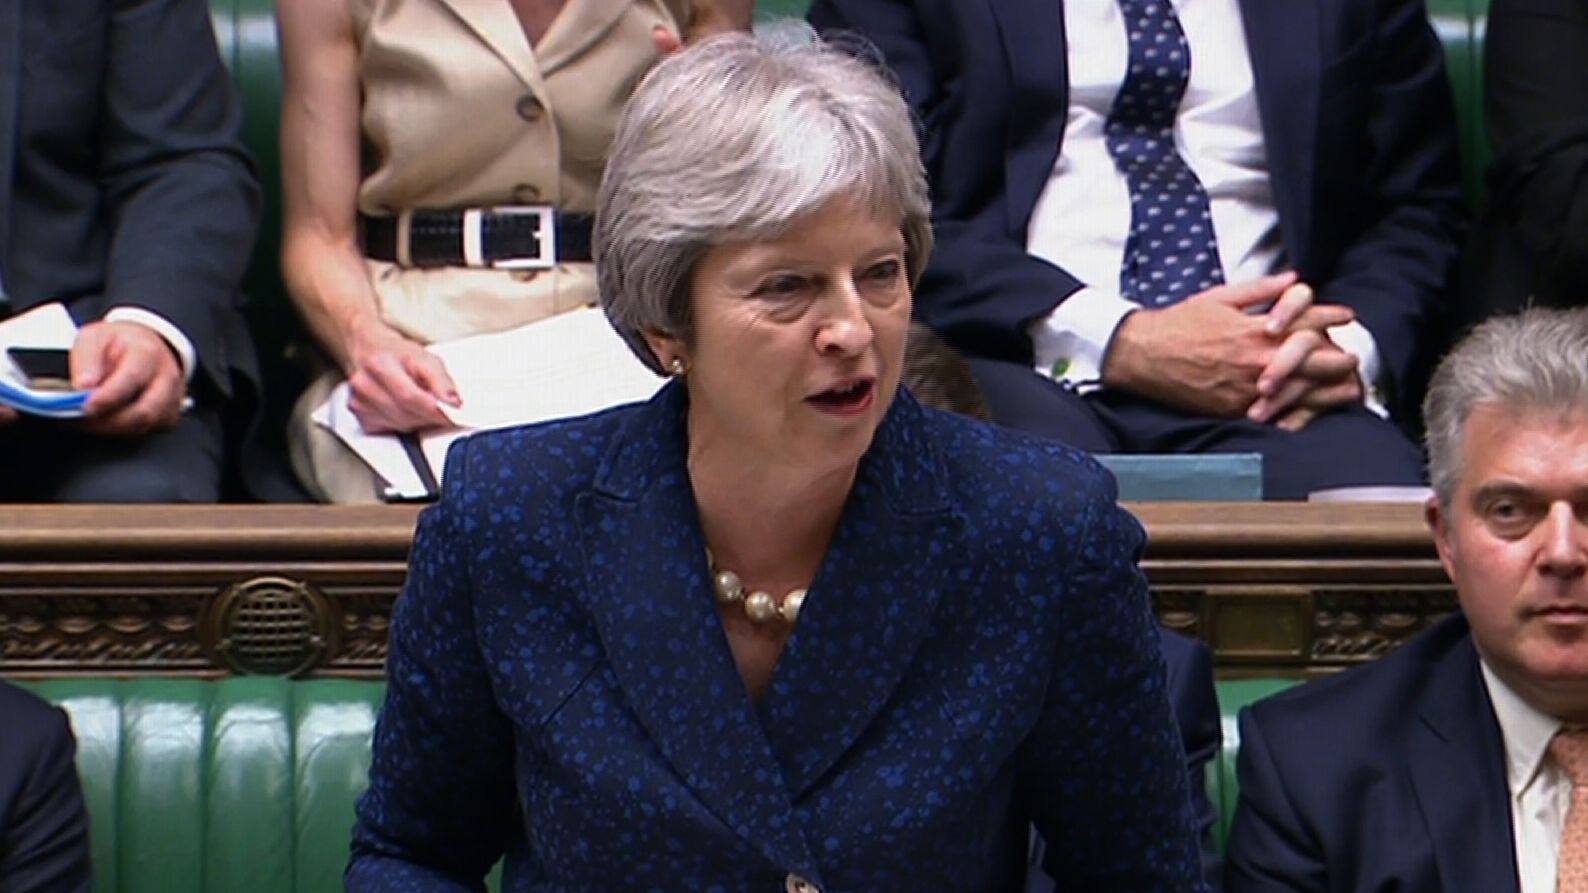 Theresa May addresses Parliament on Monday after Foreign Secretary Boris Johnson resigned.